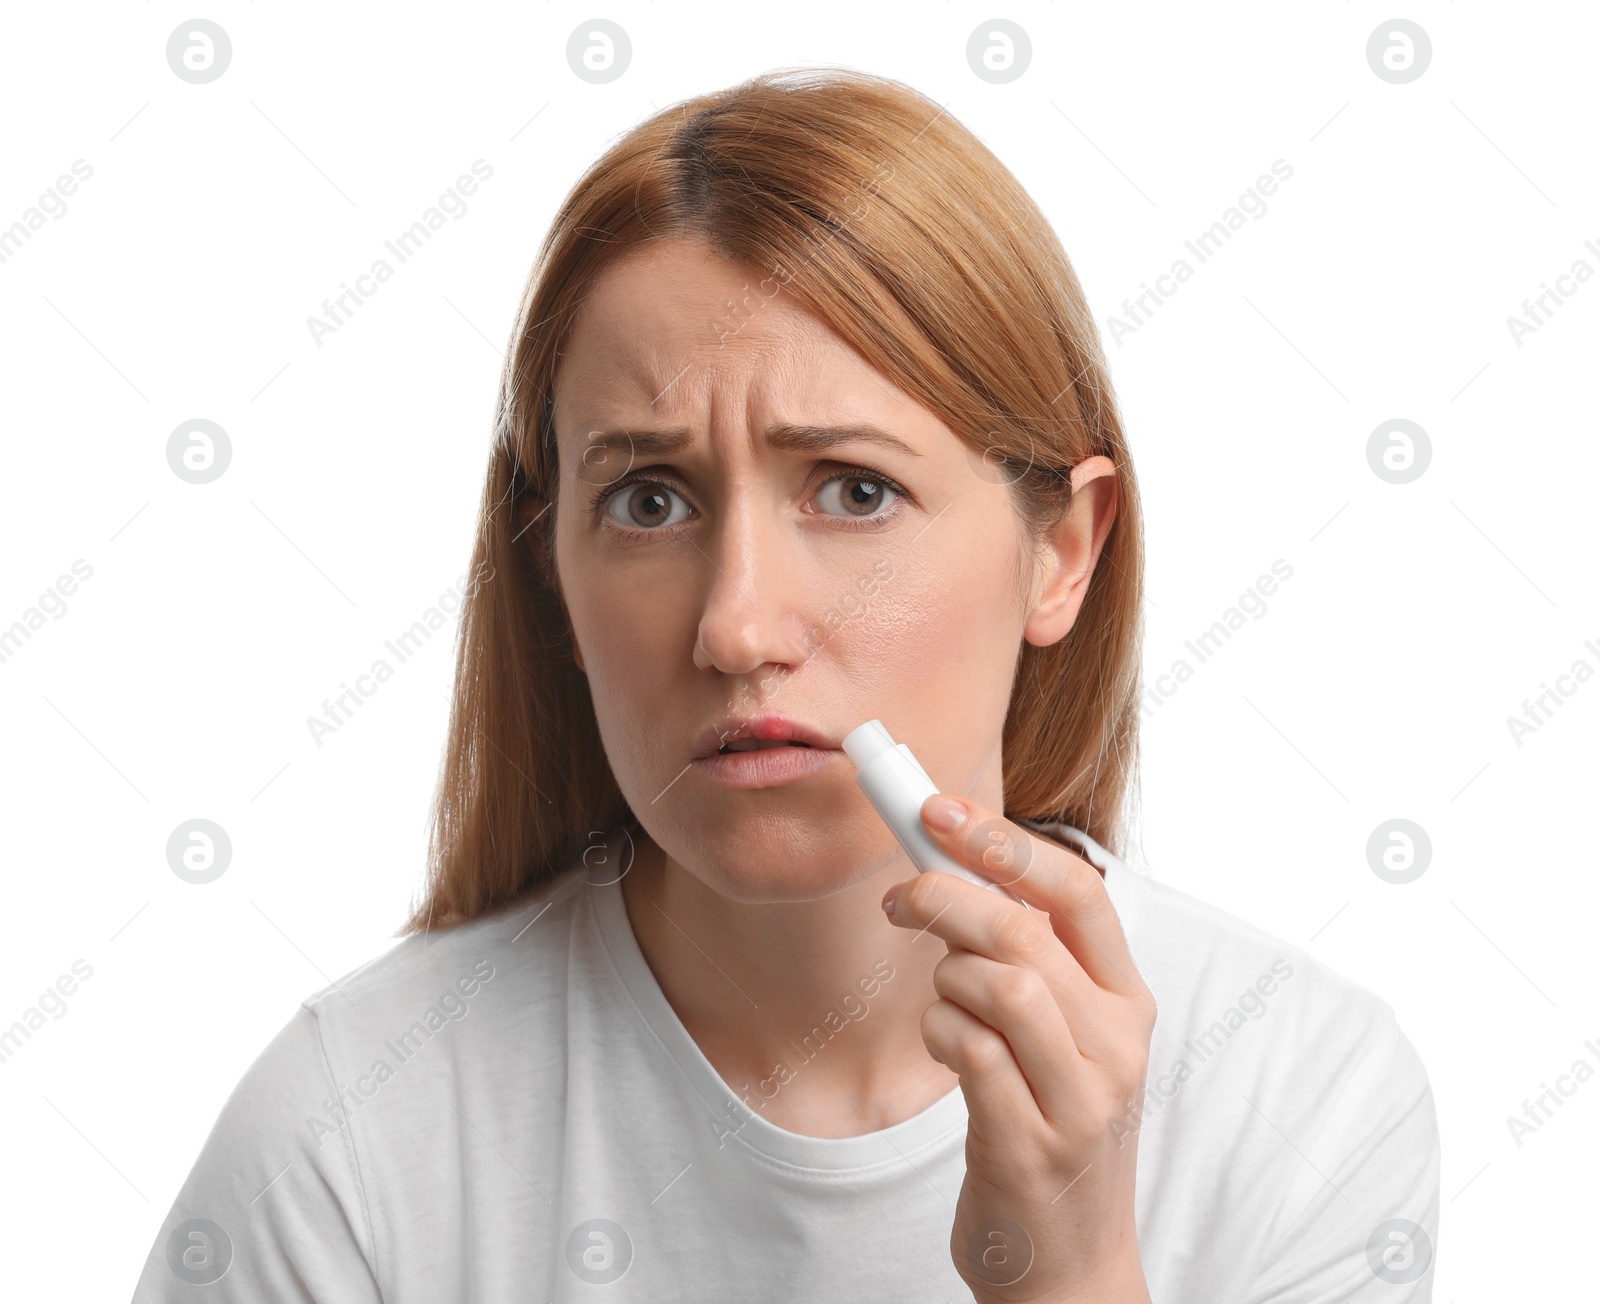 Photo of Upset woman with herpes applying lip balm against white background